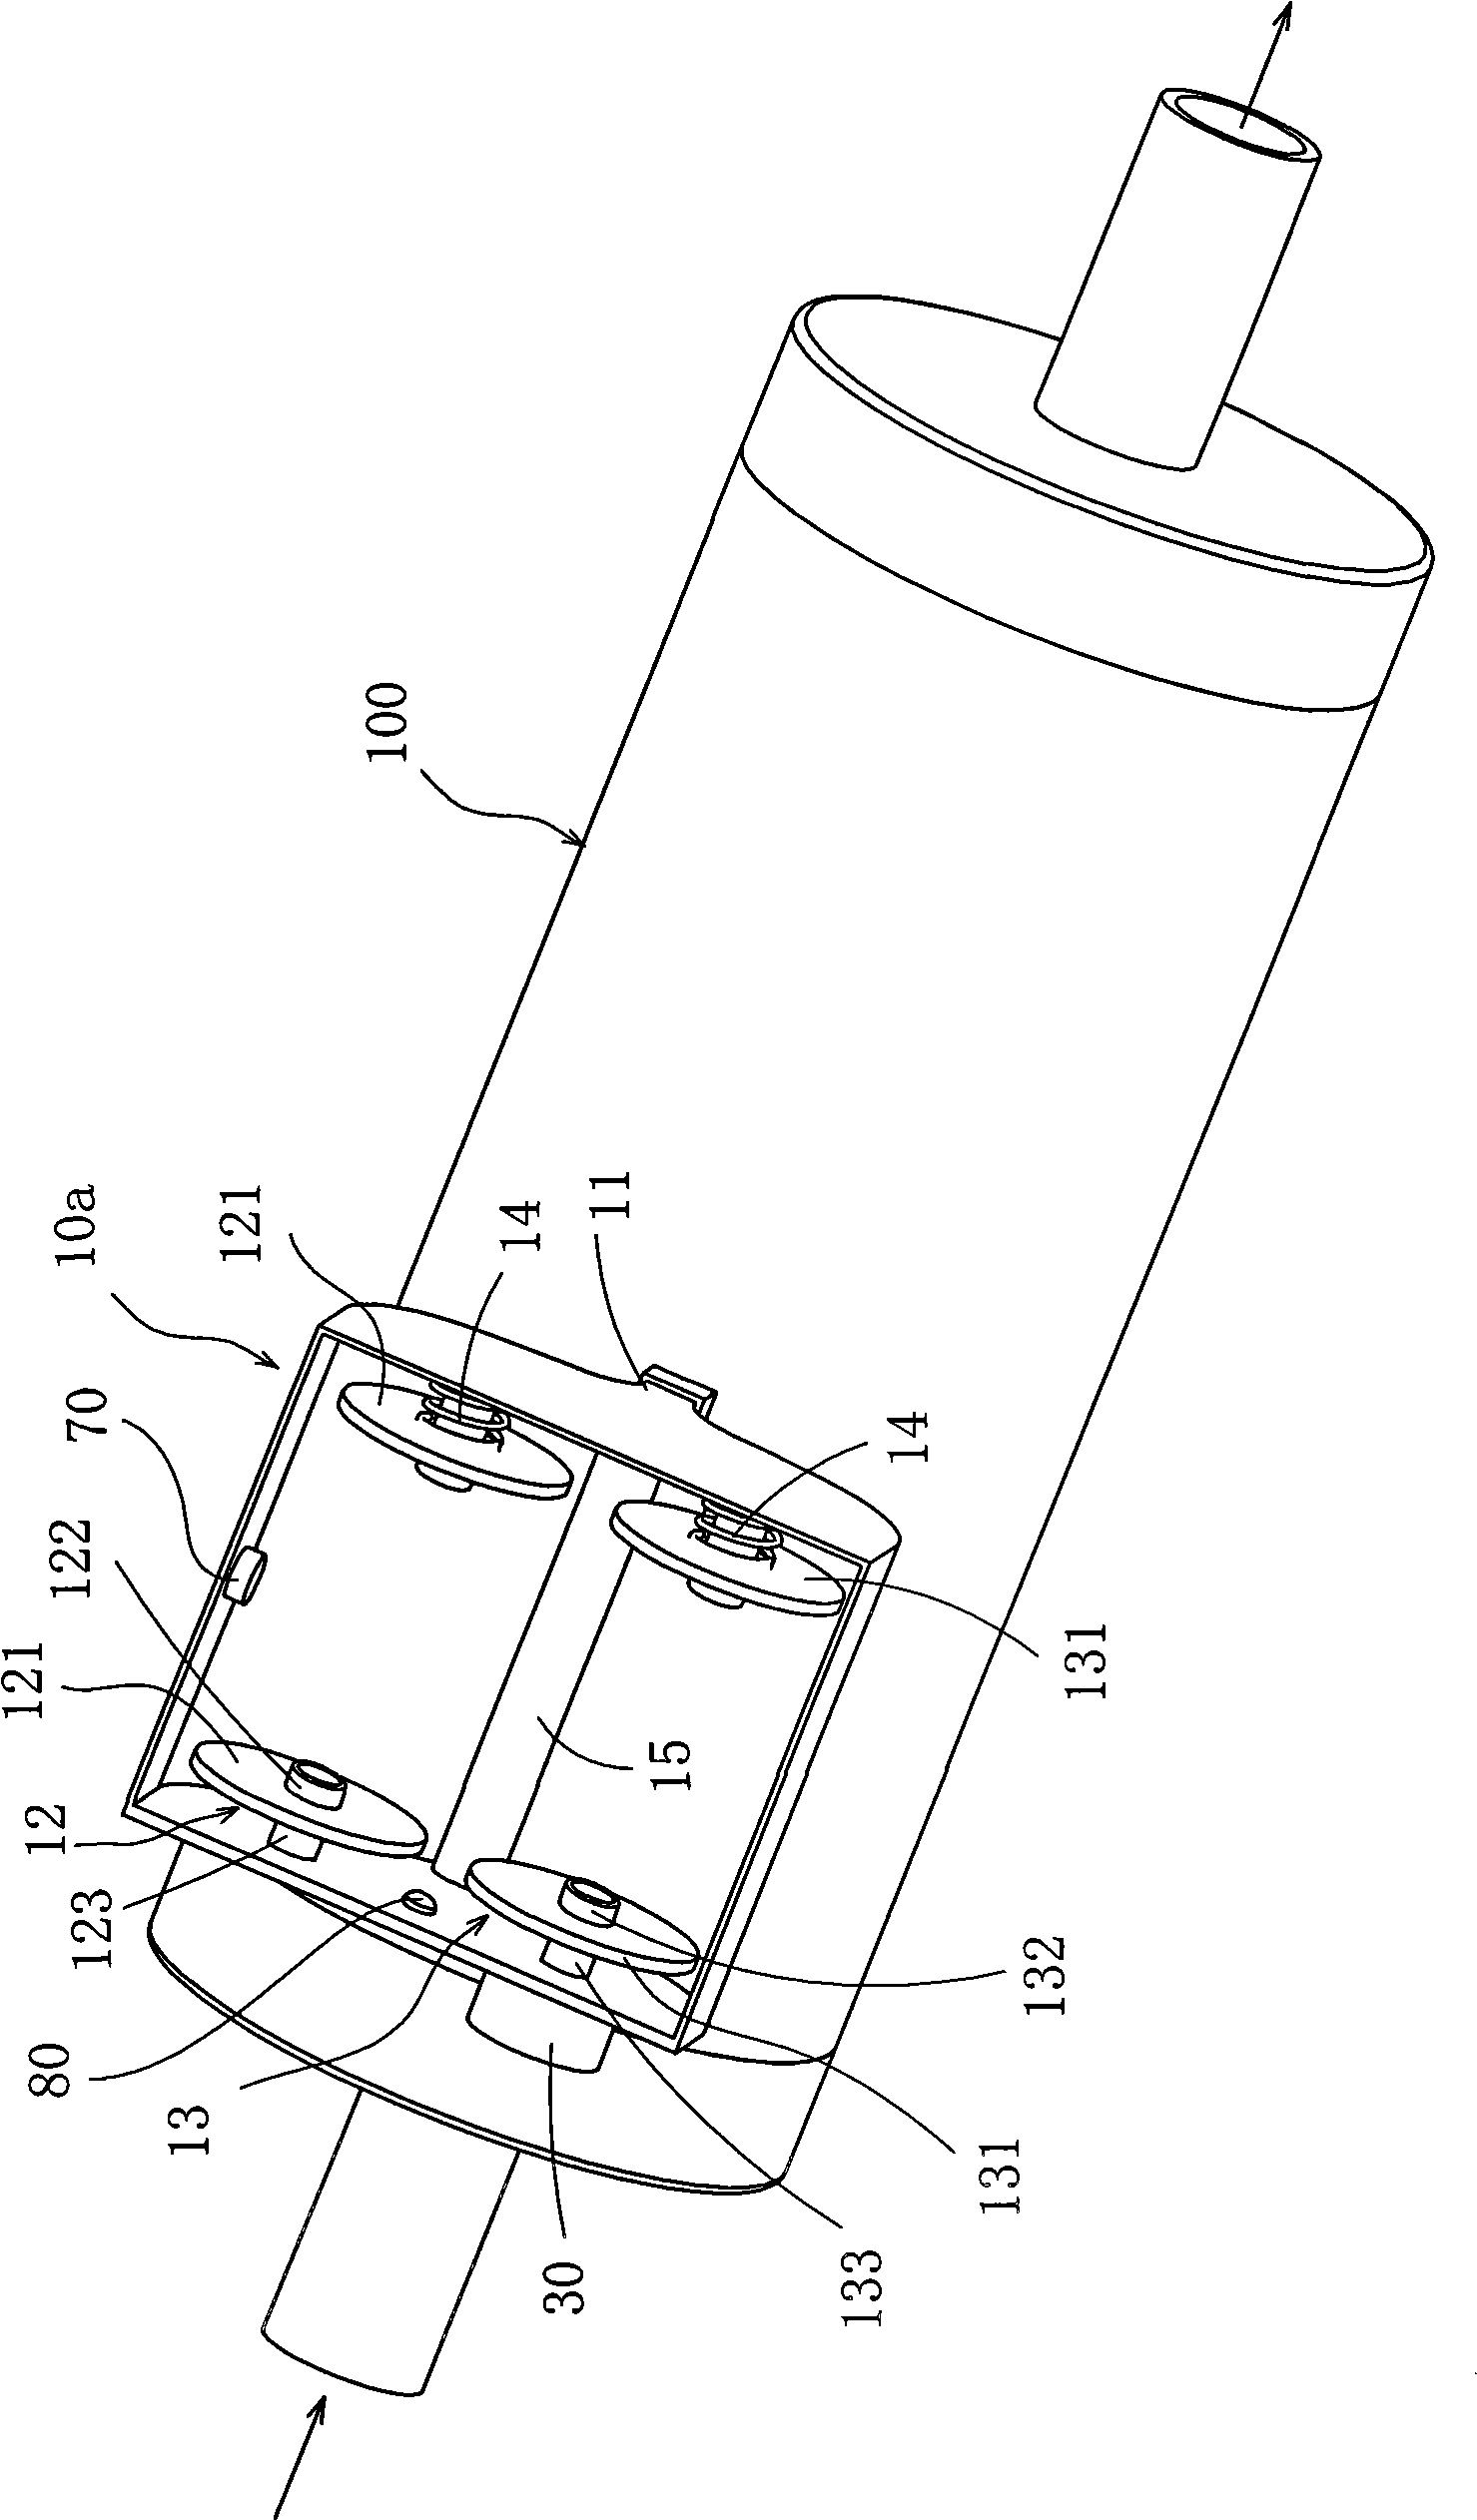 Automobile exhaust purification method and automobile exhaust purification system thereof